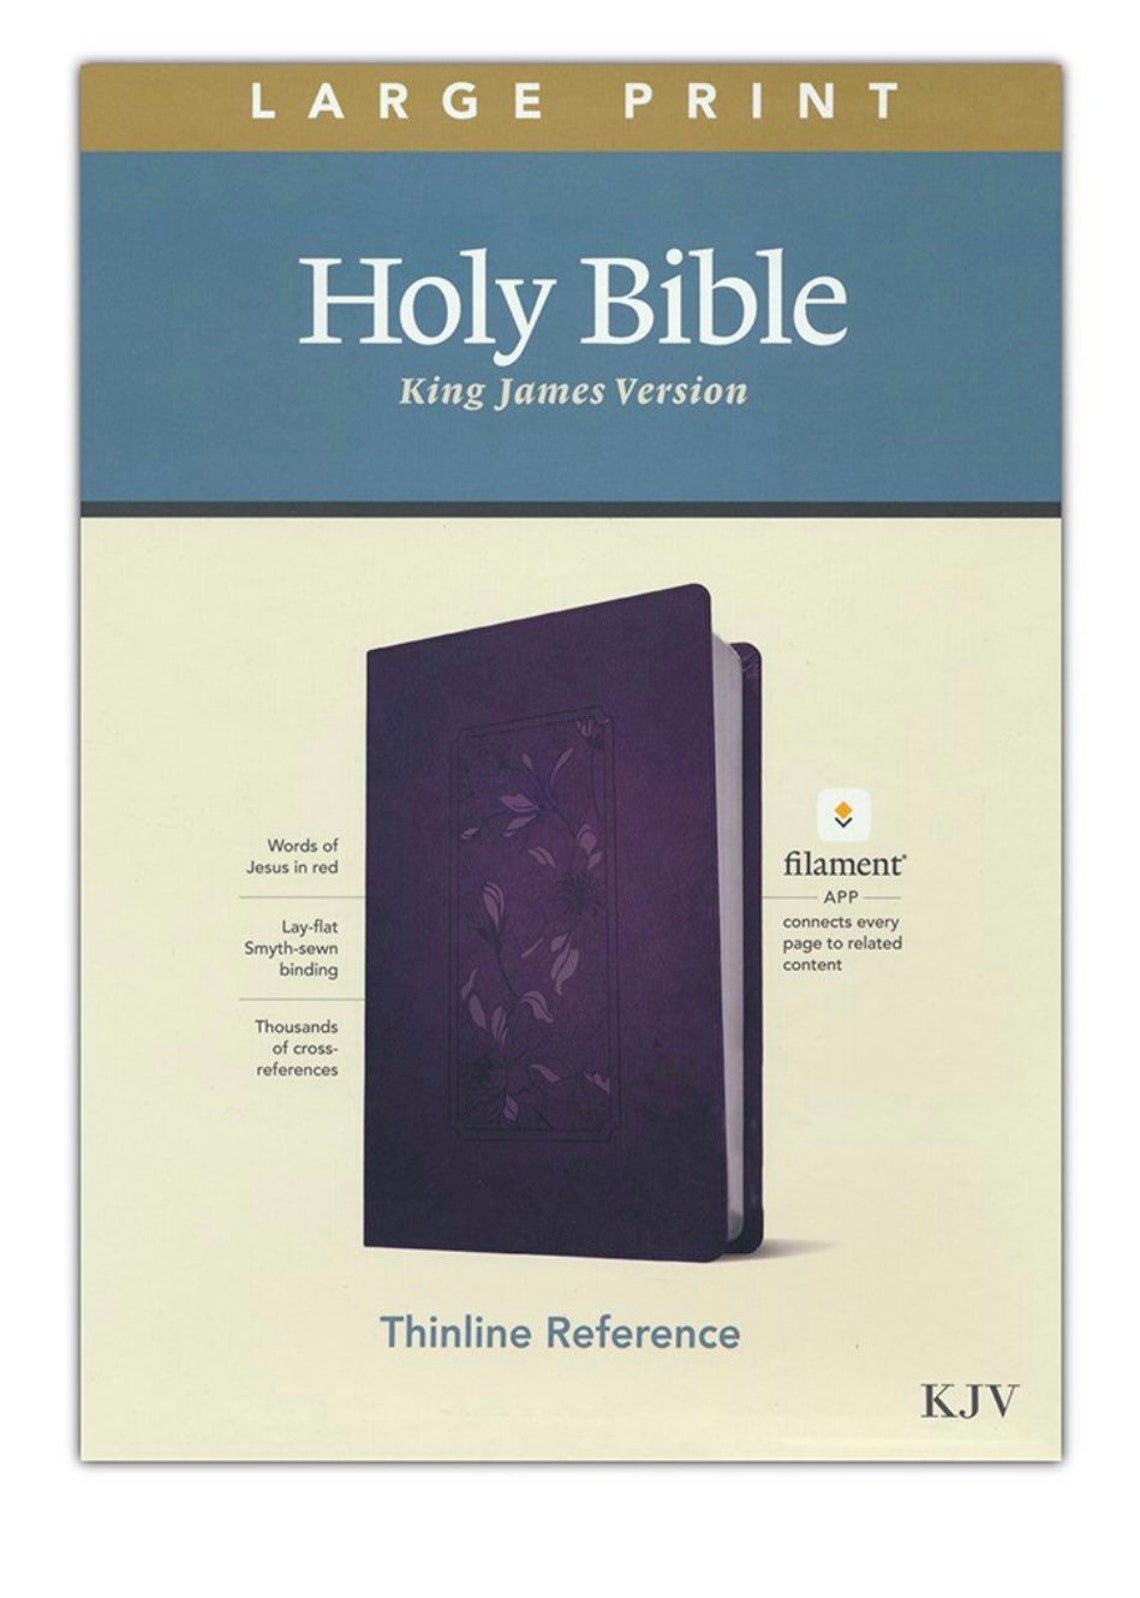 PERSONALIZED KJV Large-print Thinline Reference Bible - Etsy